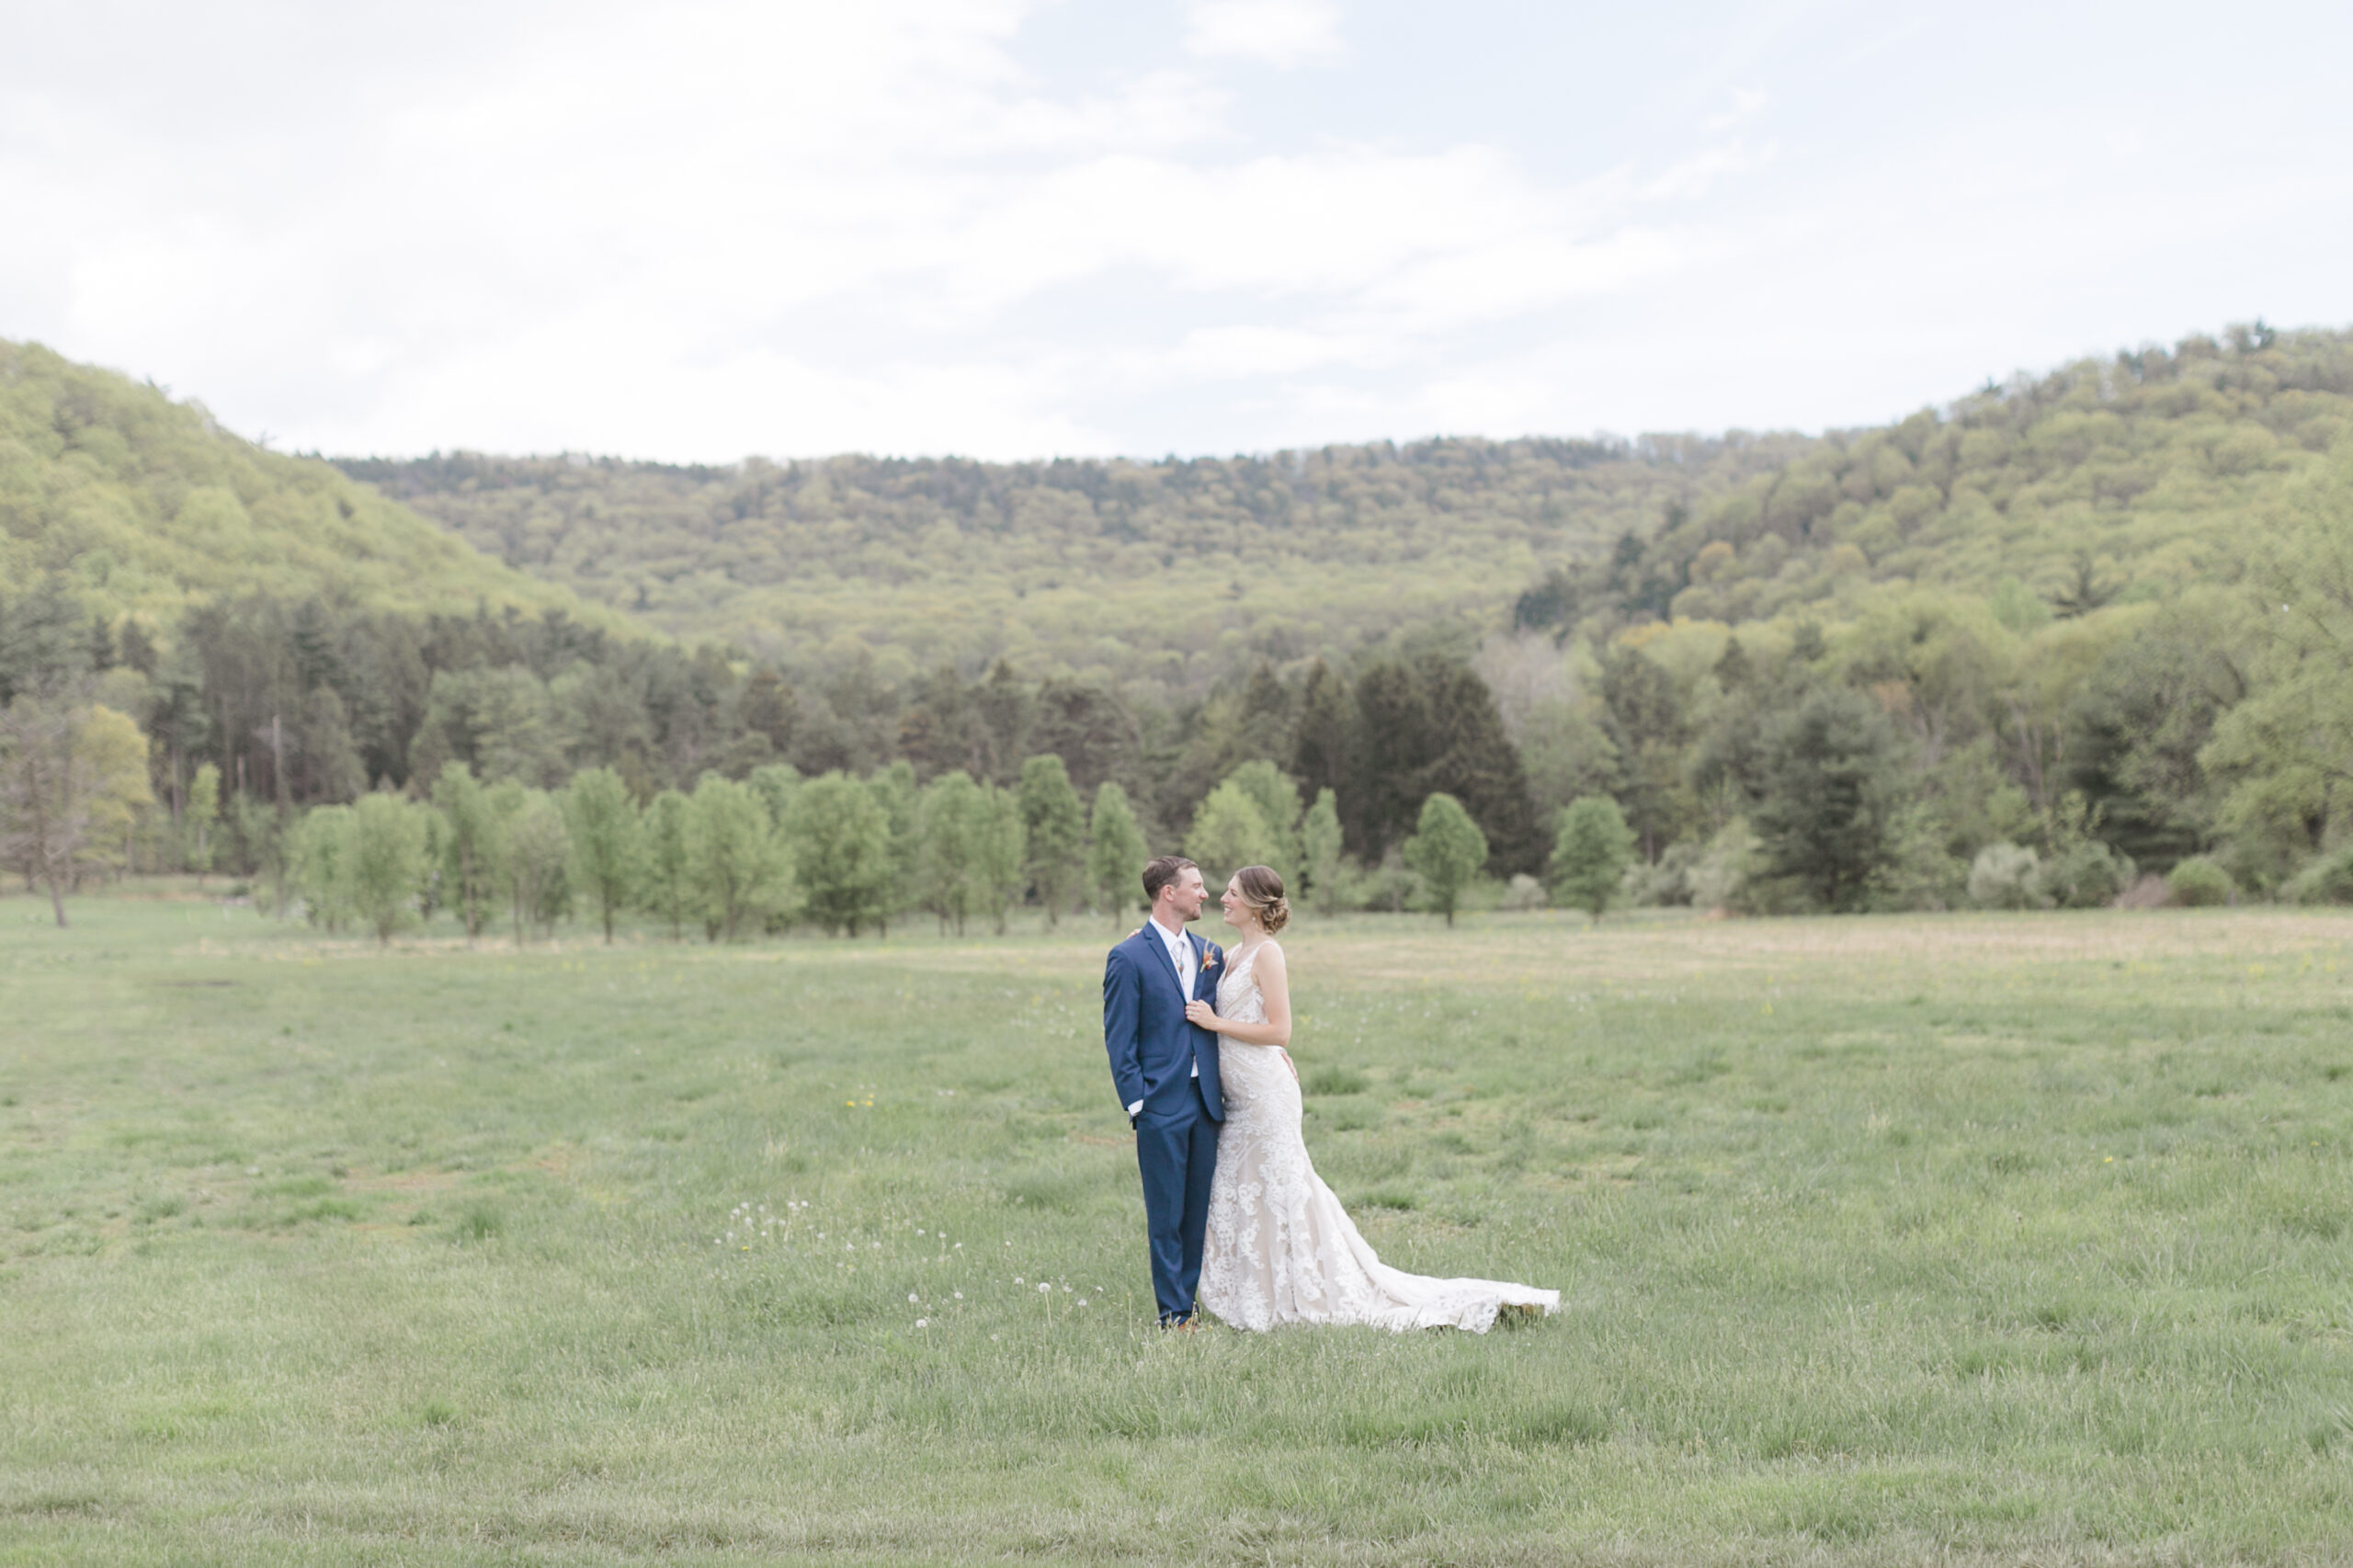 Mike and Allison in a field with mountains in the background on their wedding day